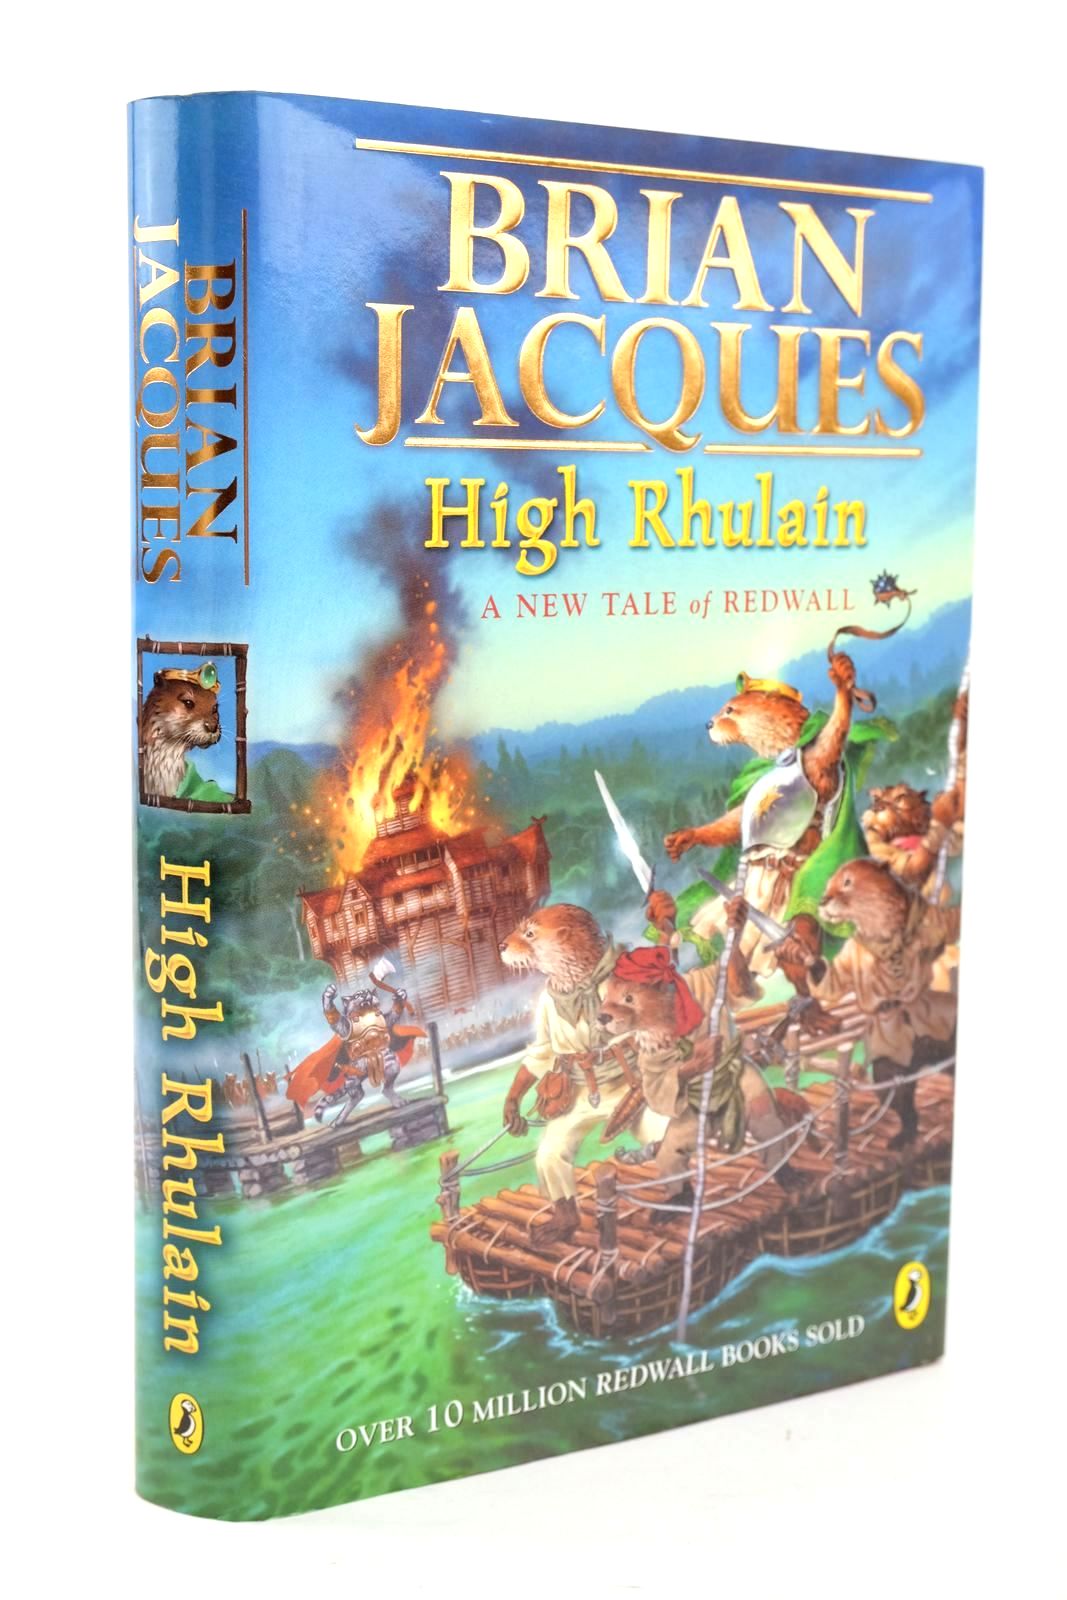 Photo of HIGH RHULAIN written by Jacques, Brian illustrated by Elliot, David published by Puffin Books (STOCK CODE: 1319392)  for sale by Stella & Rose's Books